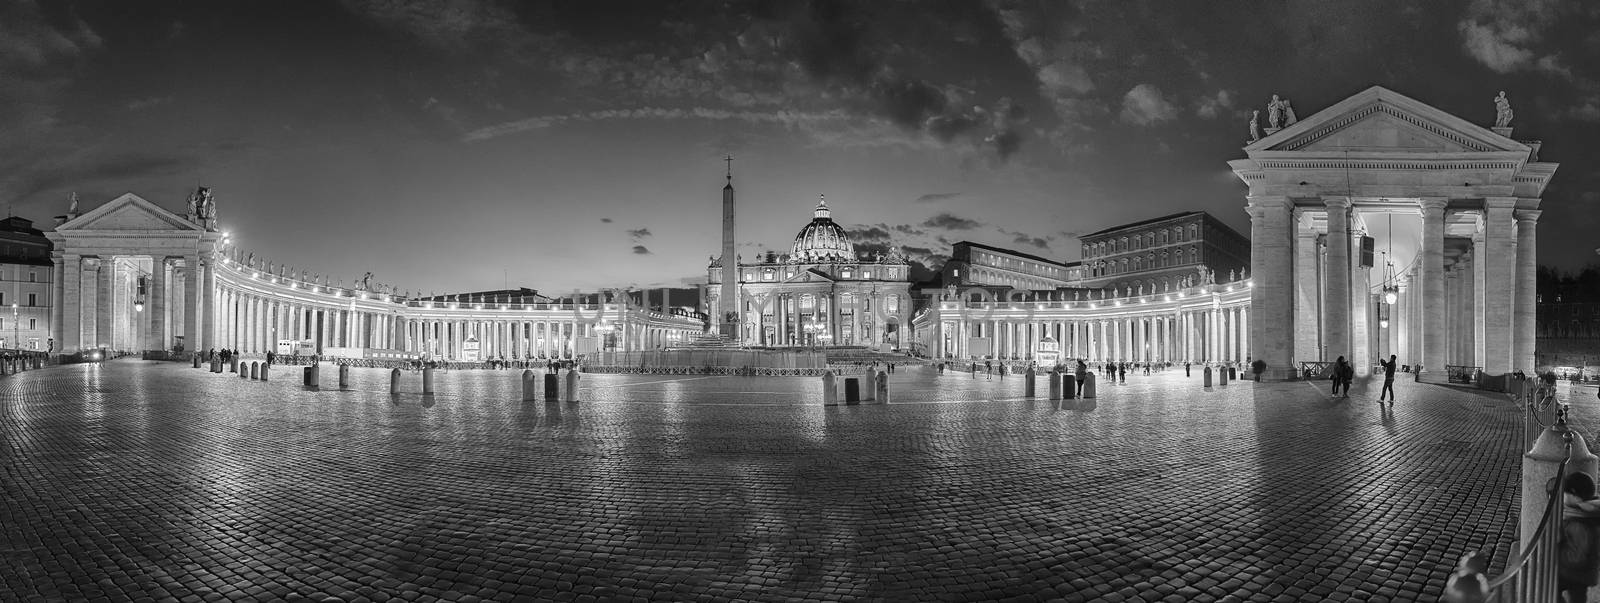 Panoramic night view of St. Peter's square in Rome, Italy by marcorubino